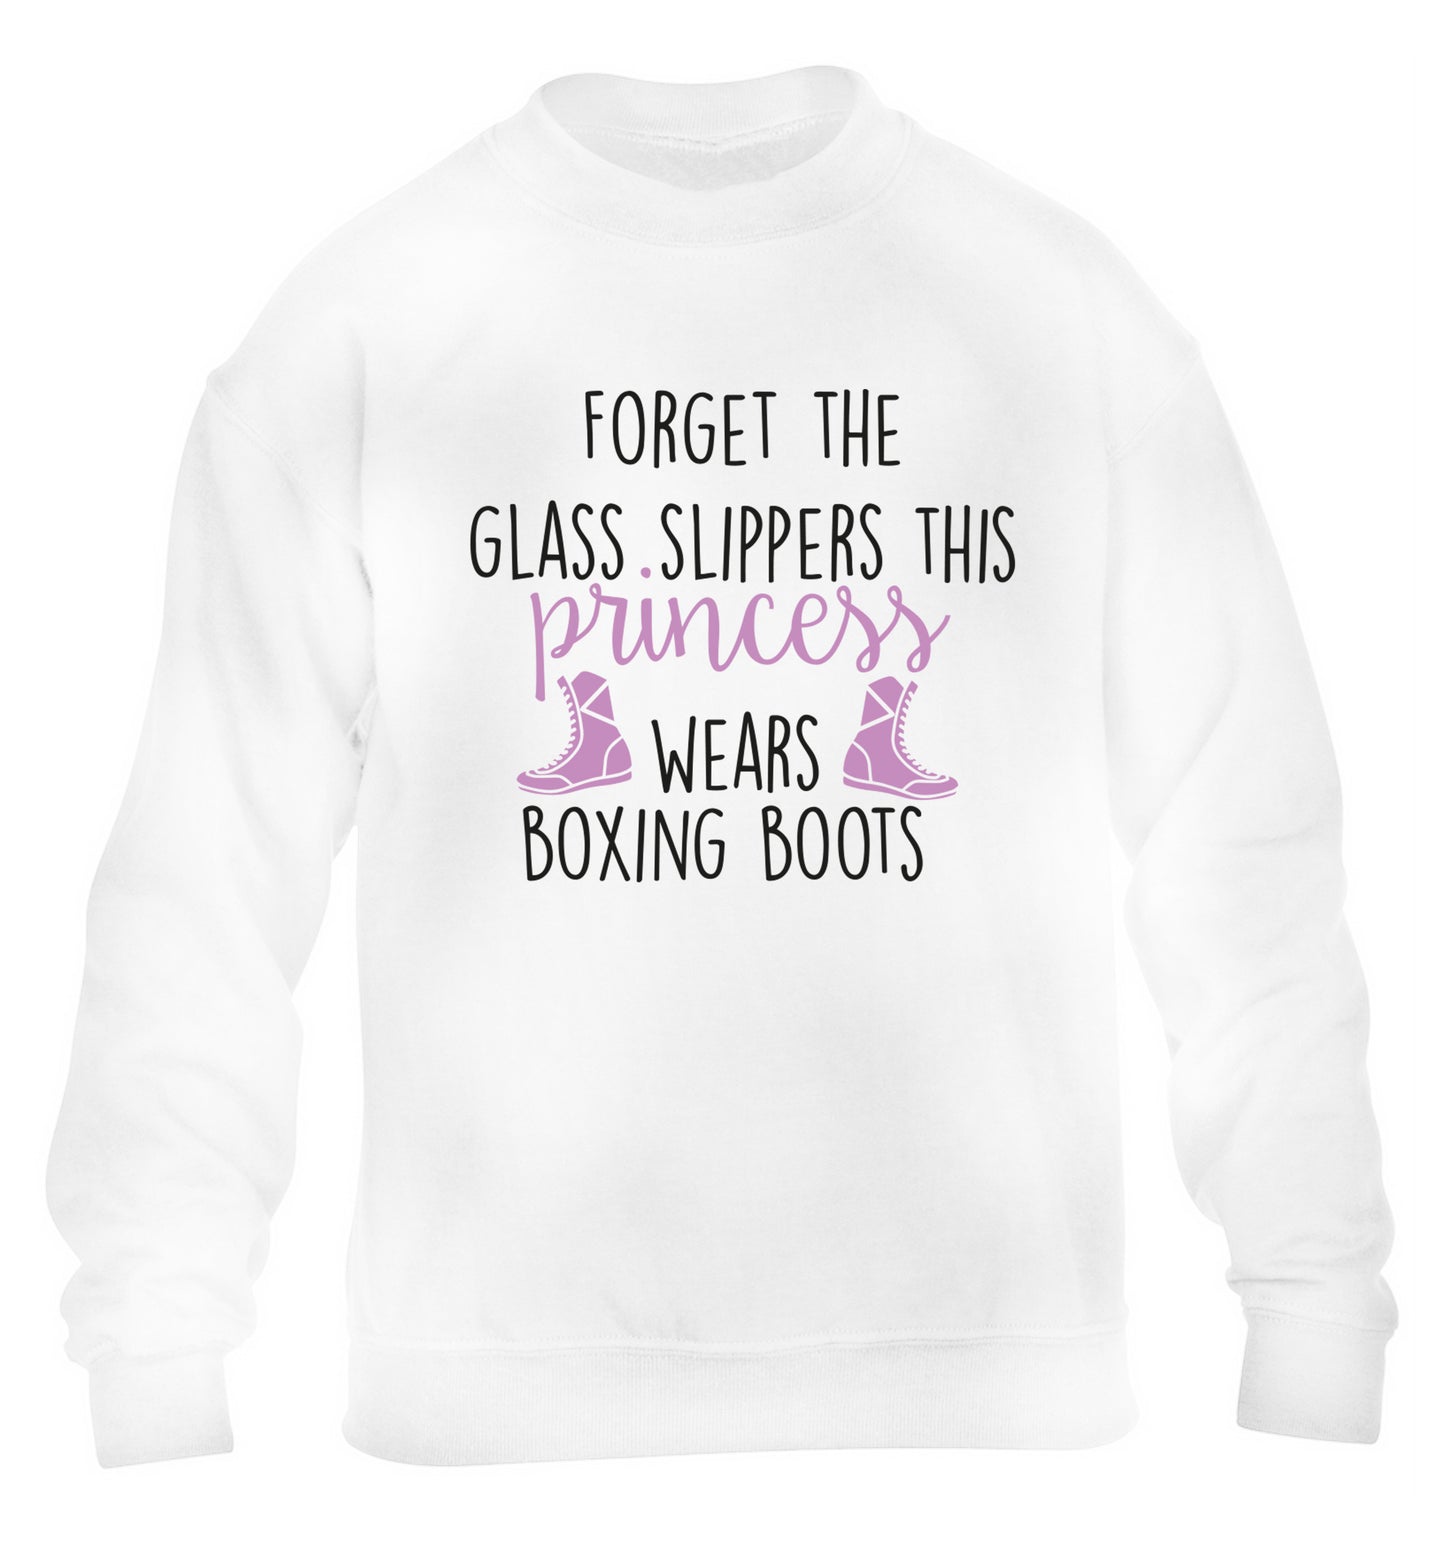 Forget the glass slippers this princess wears boxing boots children's white sweater 12-14 Years